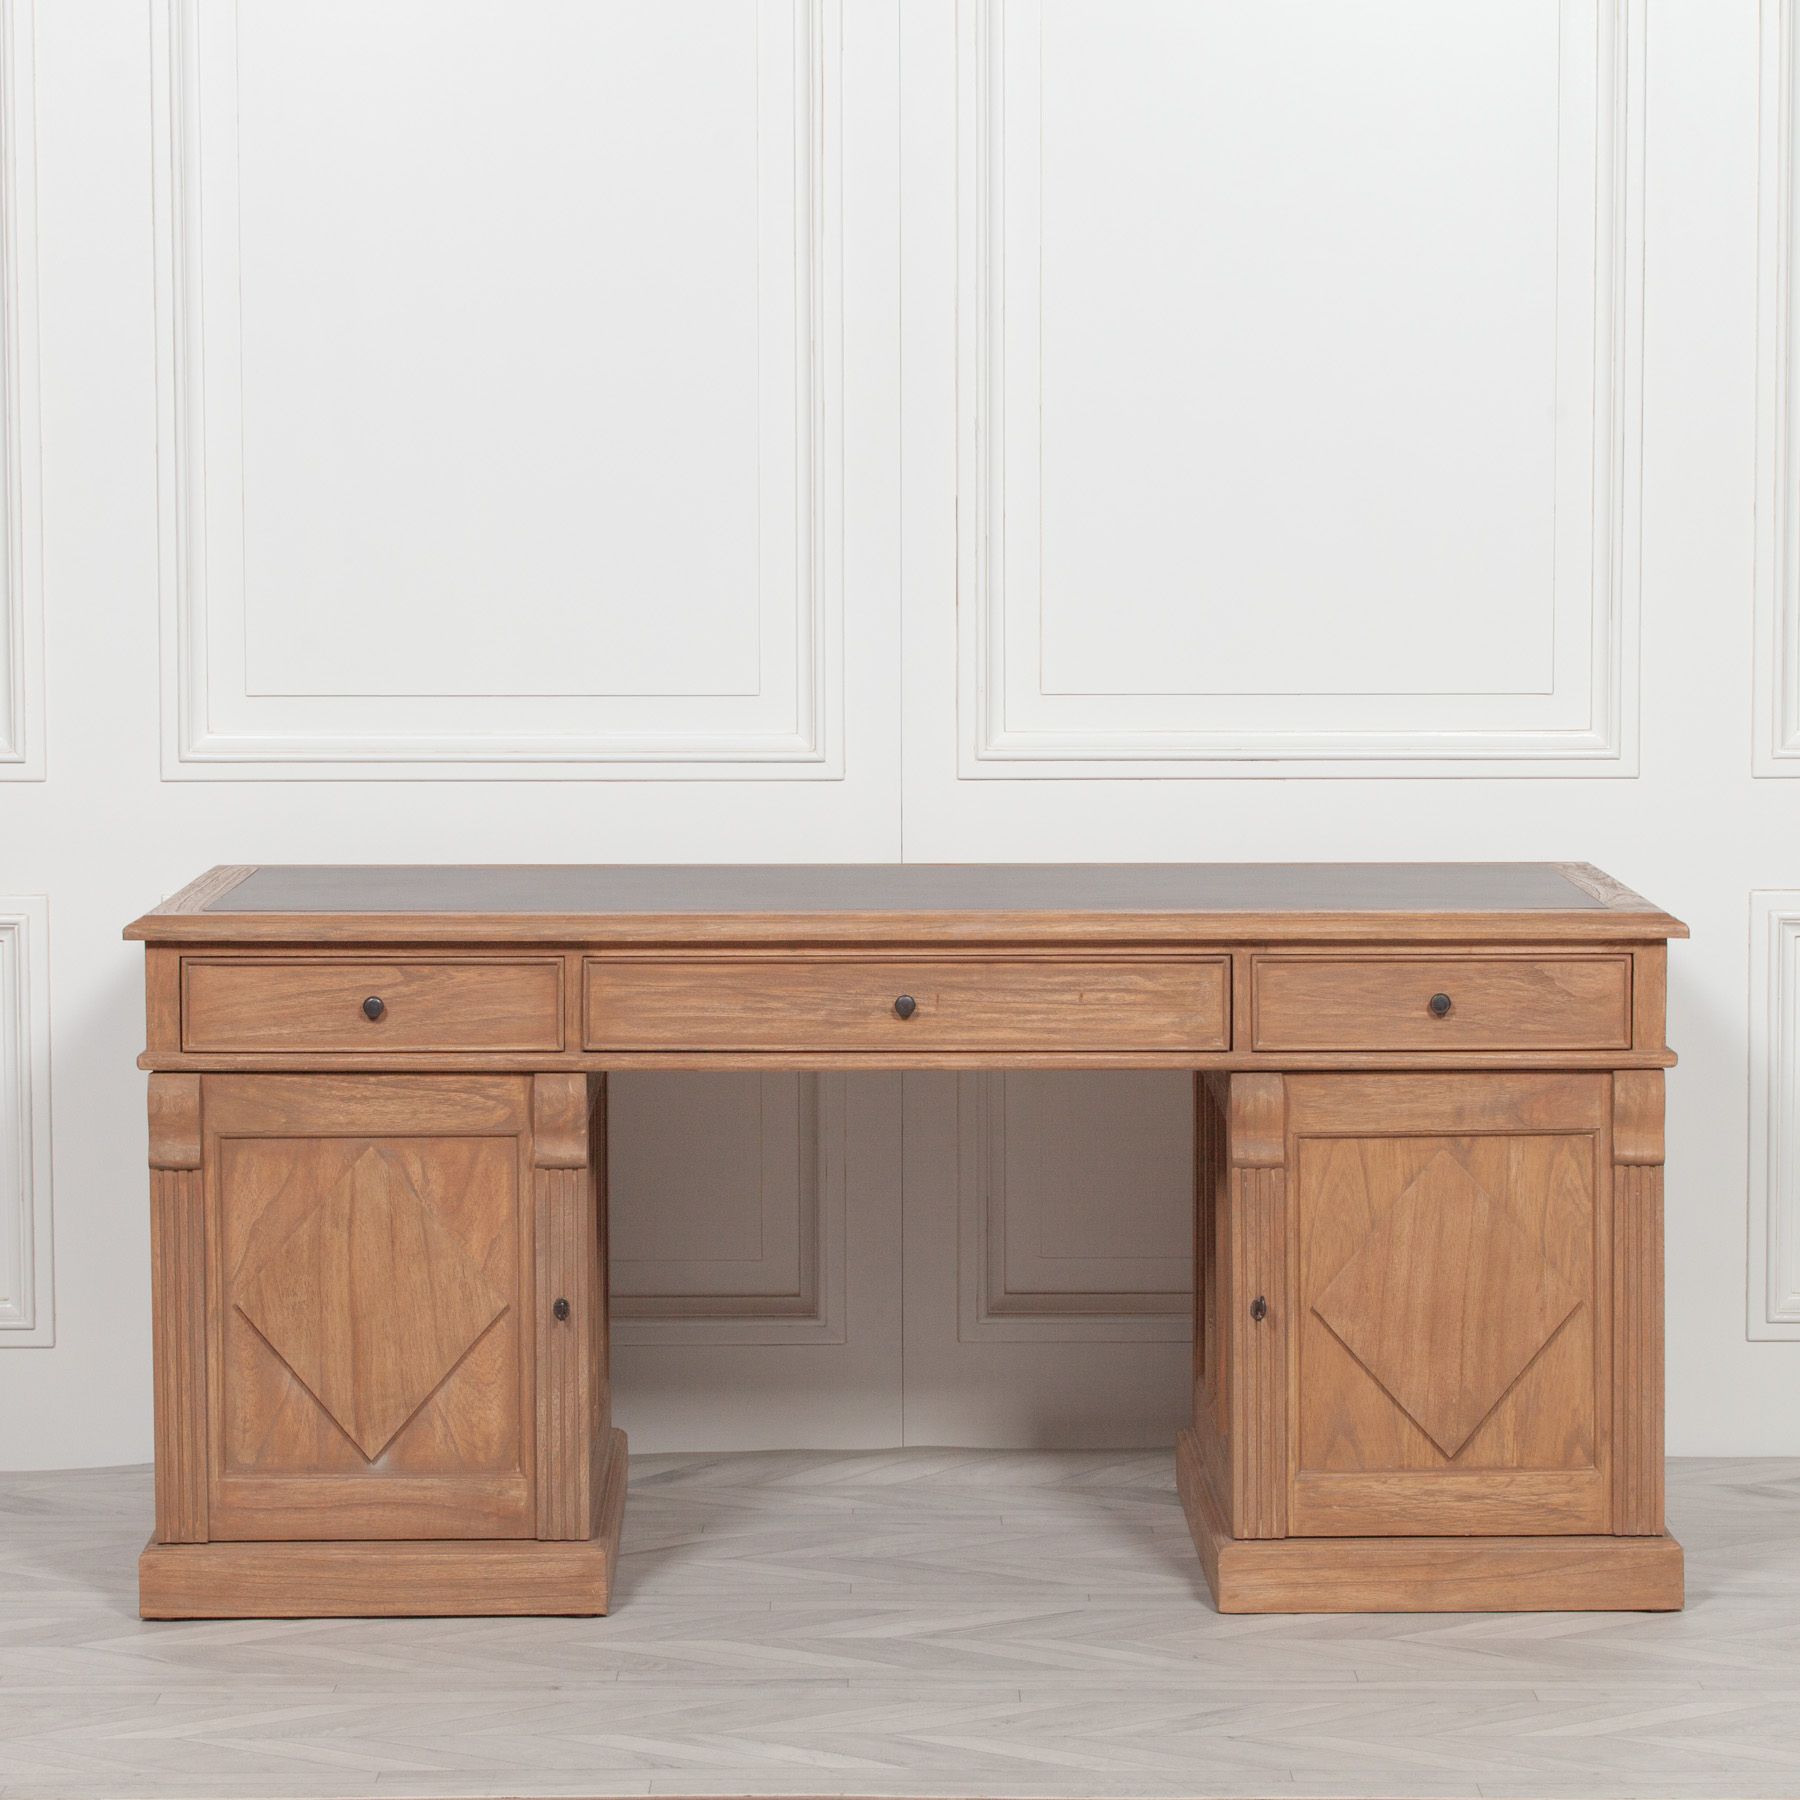 Large Rustic Writing Desk With Cupboards – Saint Décor Throughout Rustic Acacia Wooden Writing Desks (View 15 of 15)